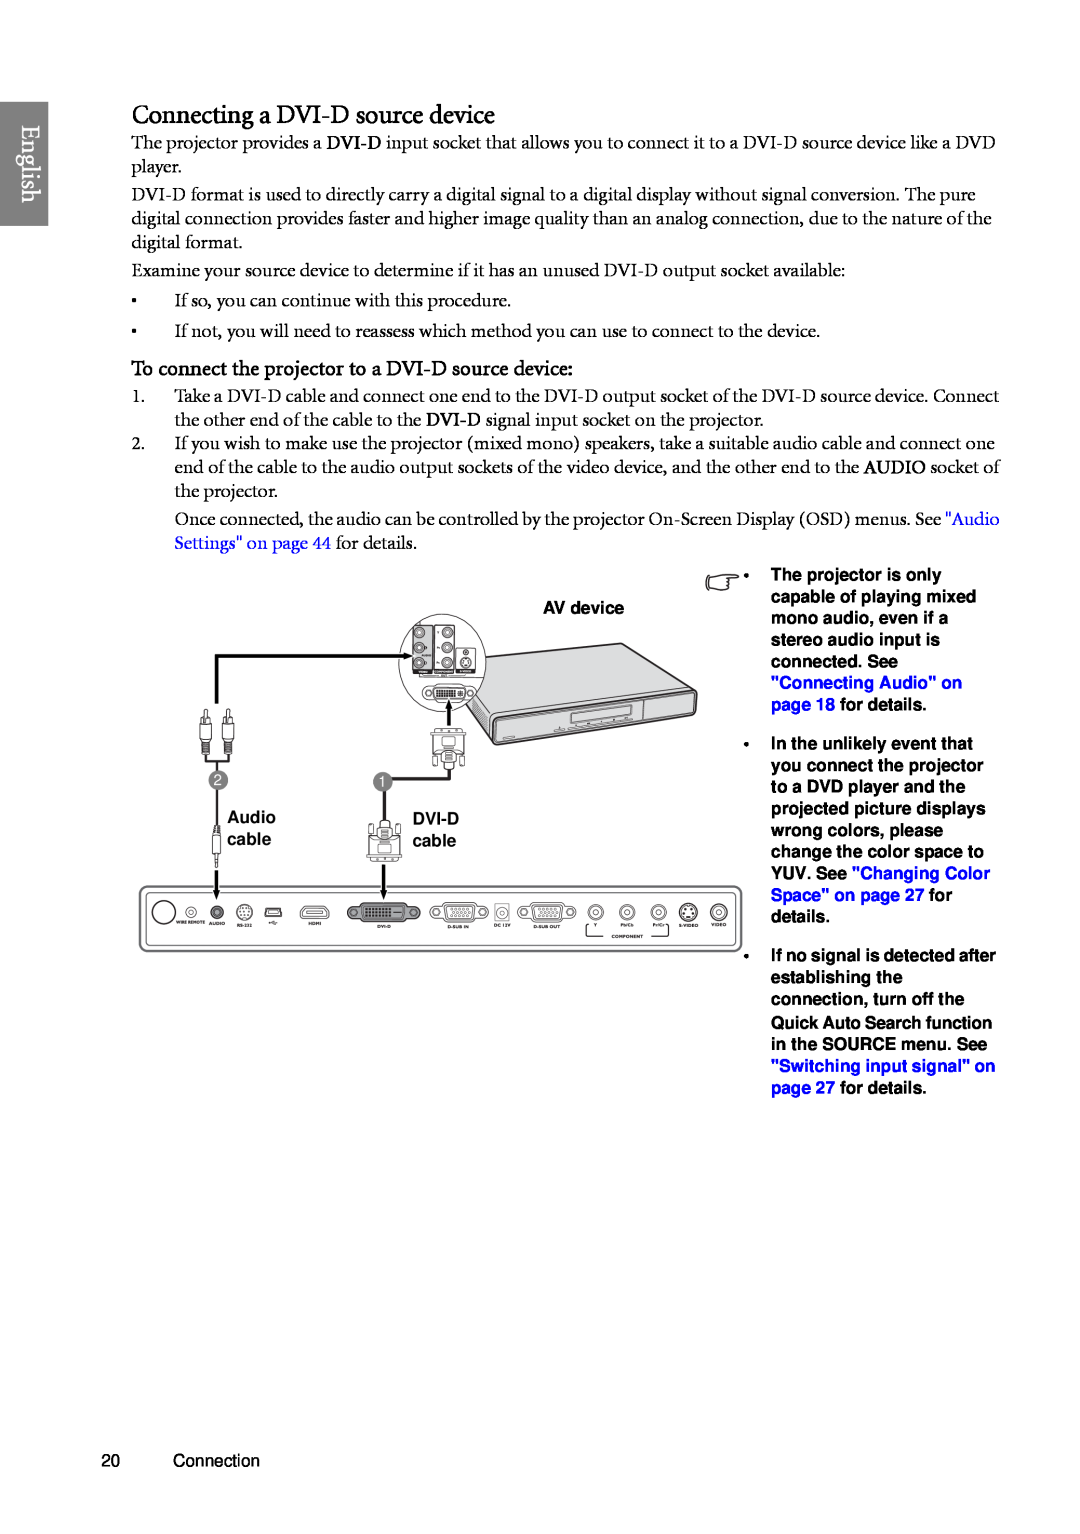 BenQ SP920 user manual Connecting a DVI-D source device, English, To connect the projector to a DVI-D source device 